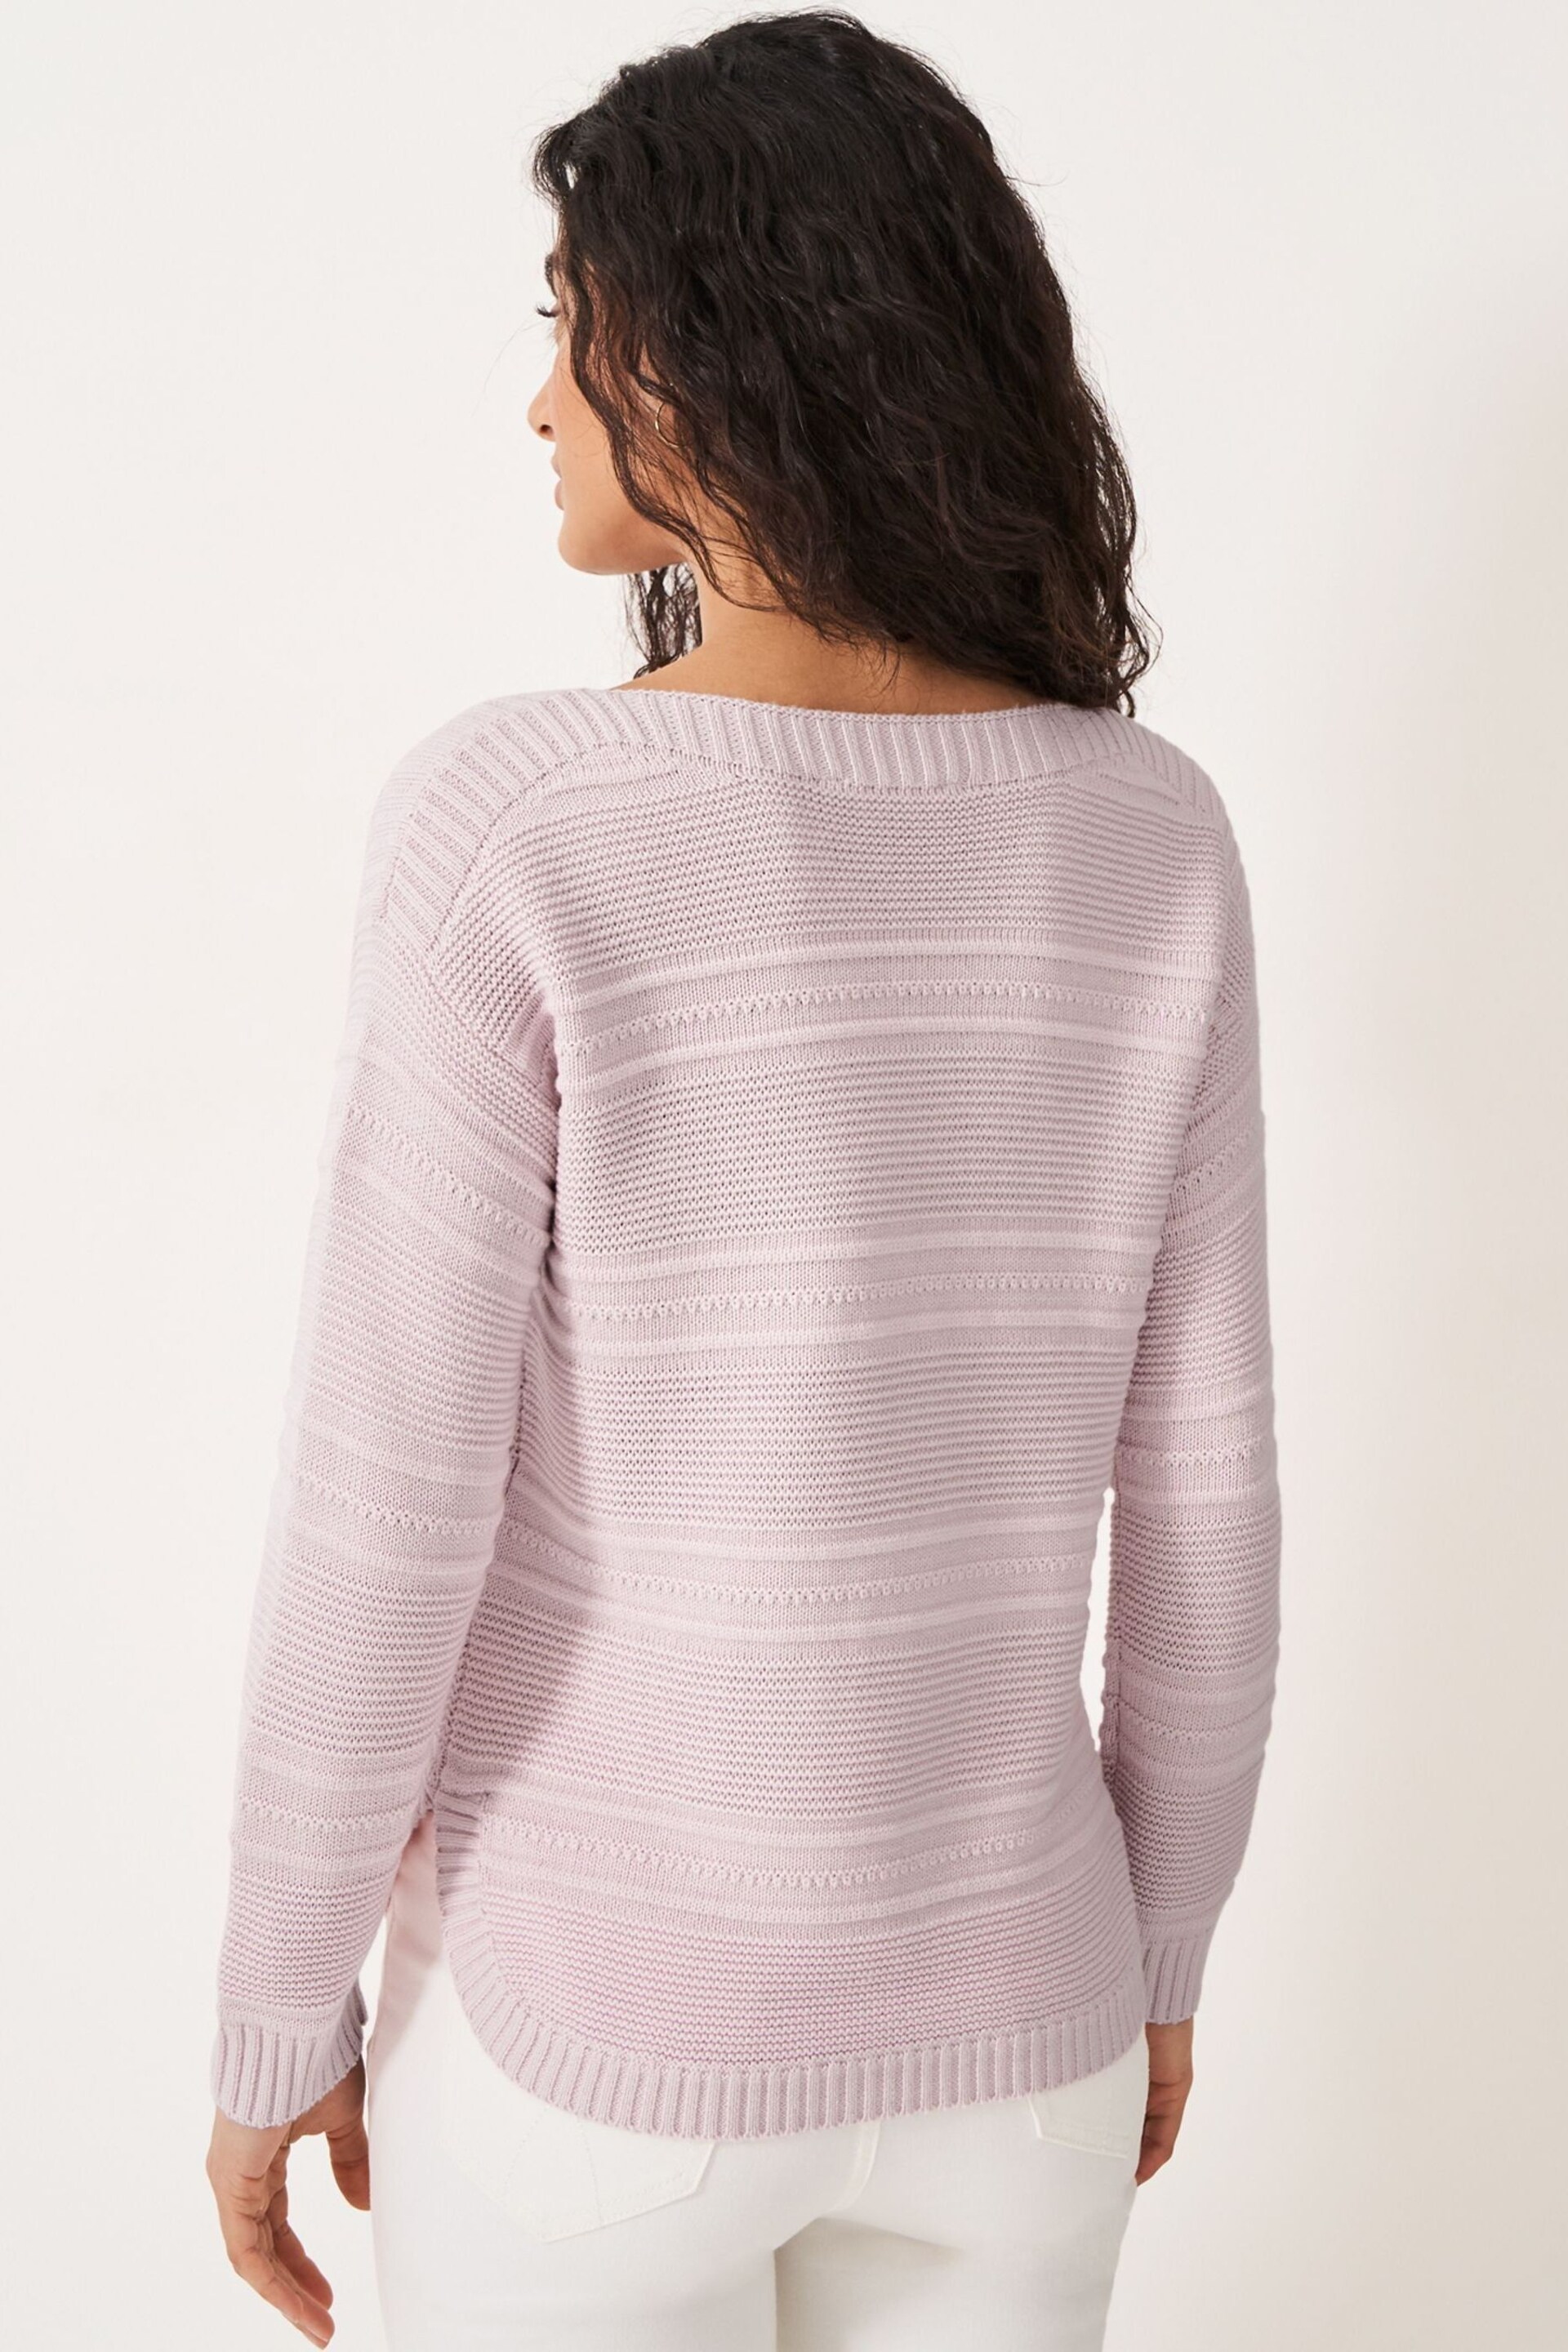 Crew Clothing Tali Knit Jumper - Image 2 of 5